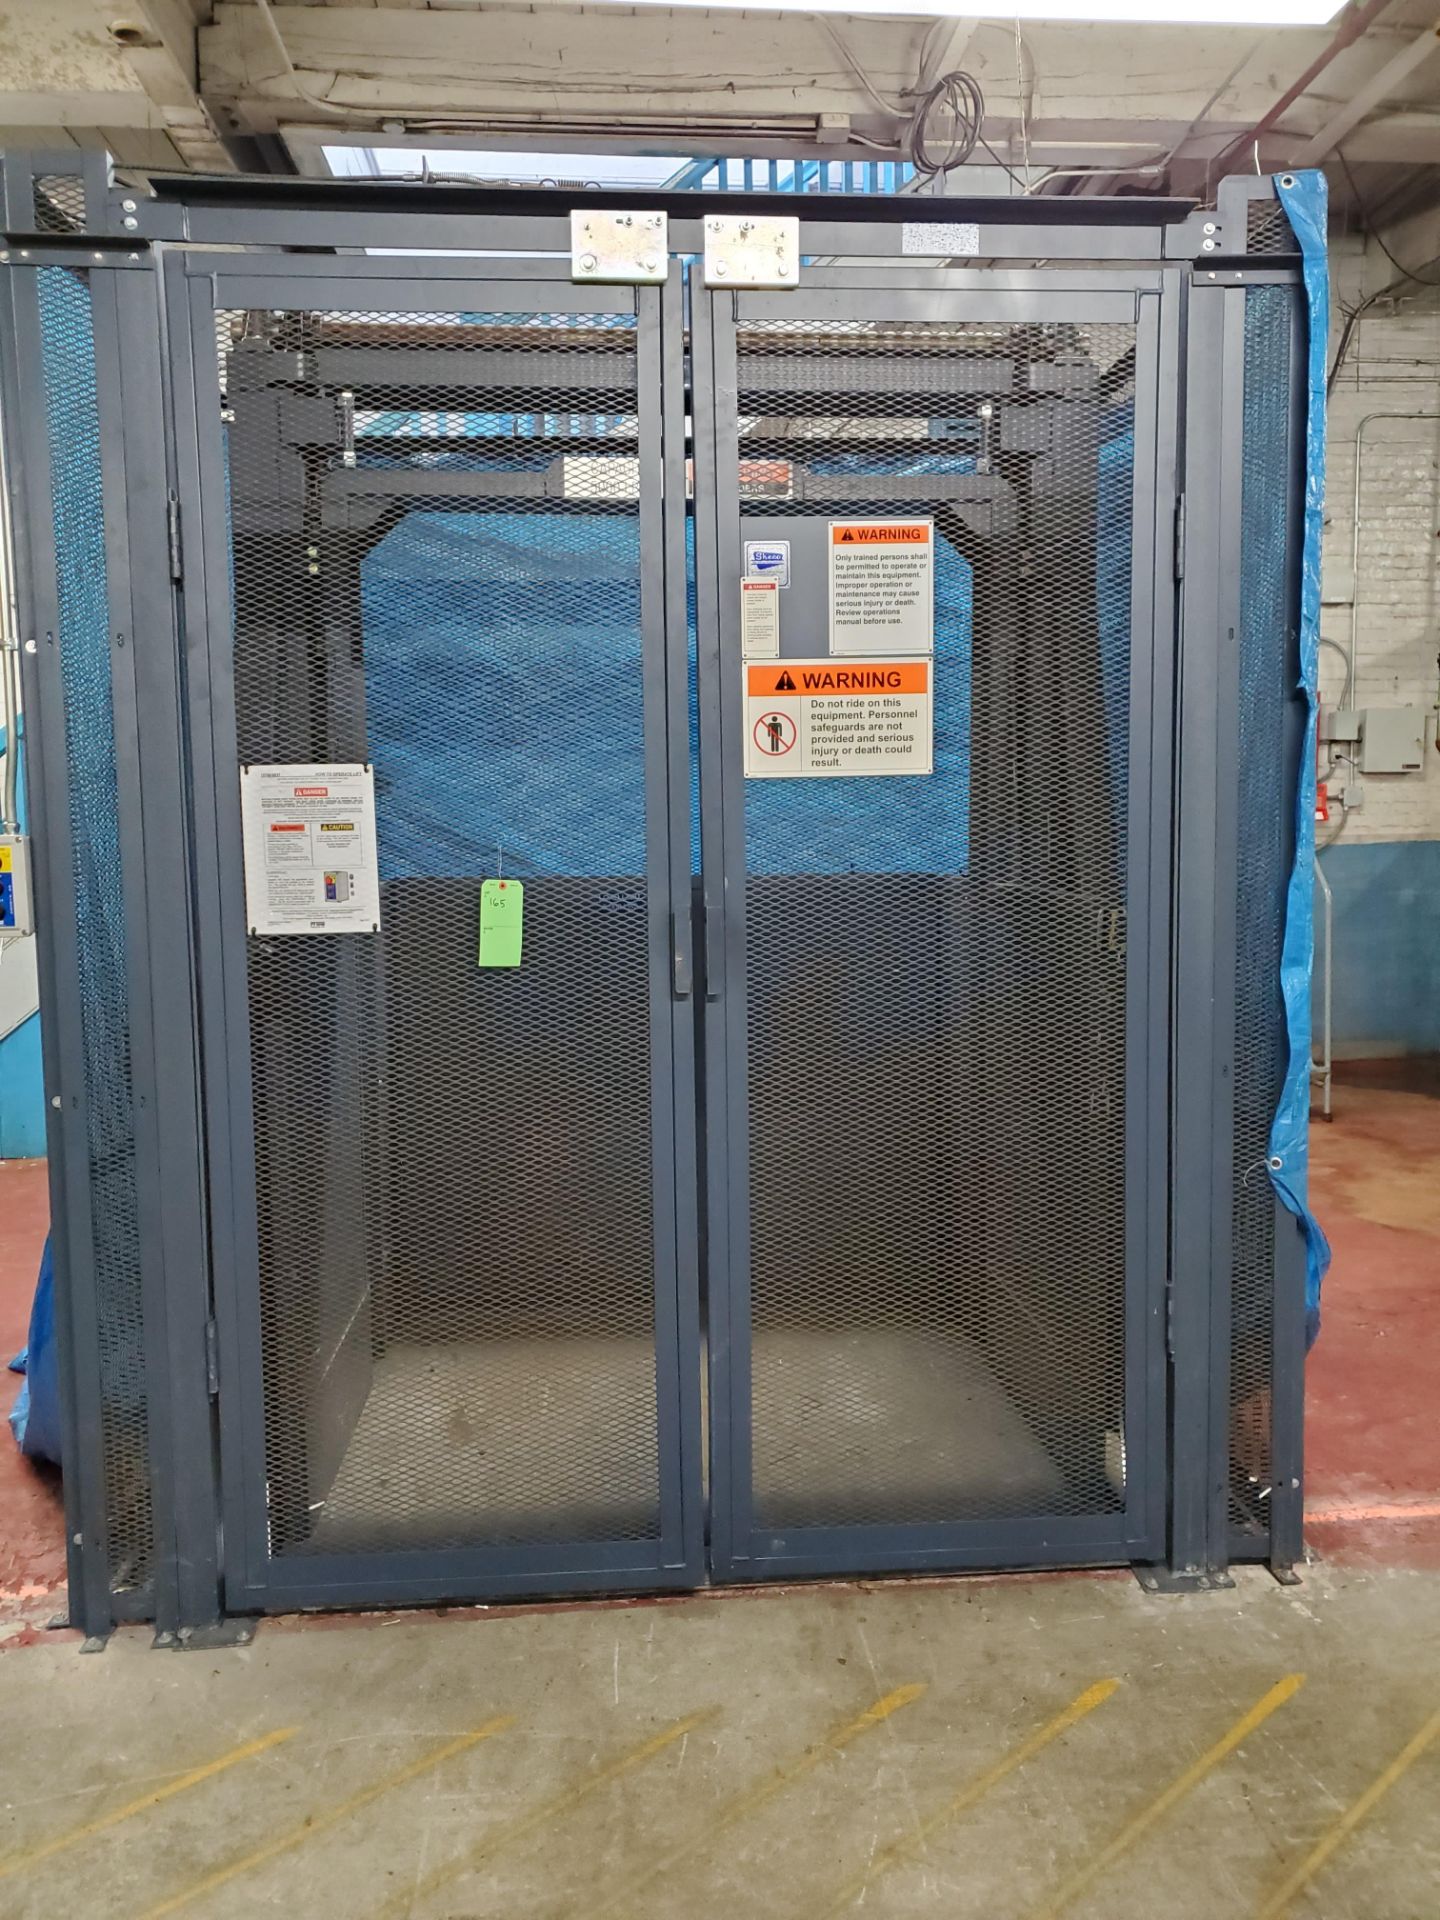 Pflow 5000 lb Vertical Equipment Lift, Series 21, with motor